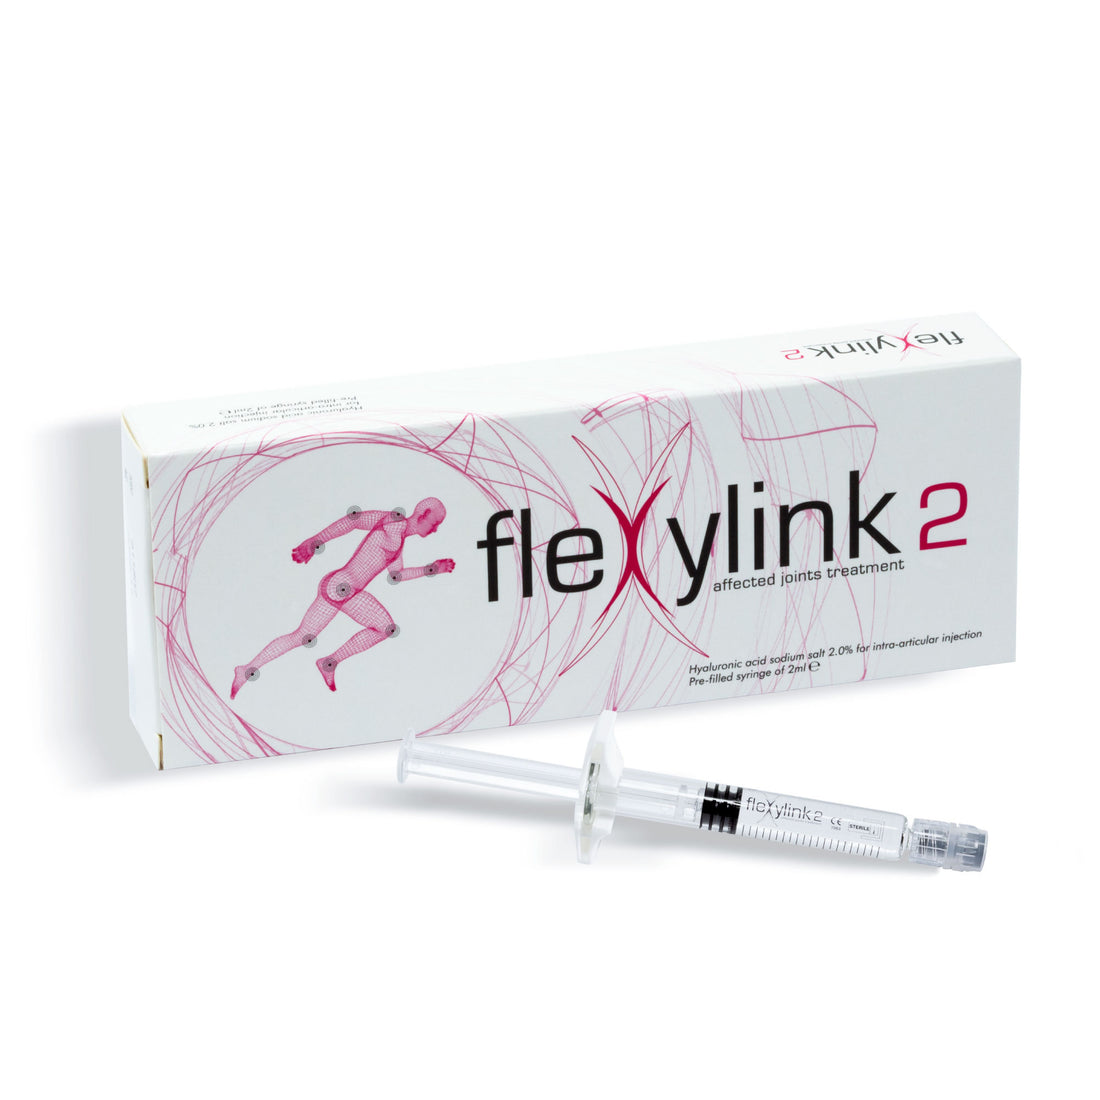 FLEXYLINK 2 - Hyaluronic Acid with a High Degree of Viscosity for Joints Affected by OA